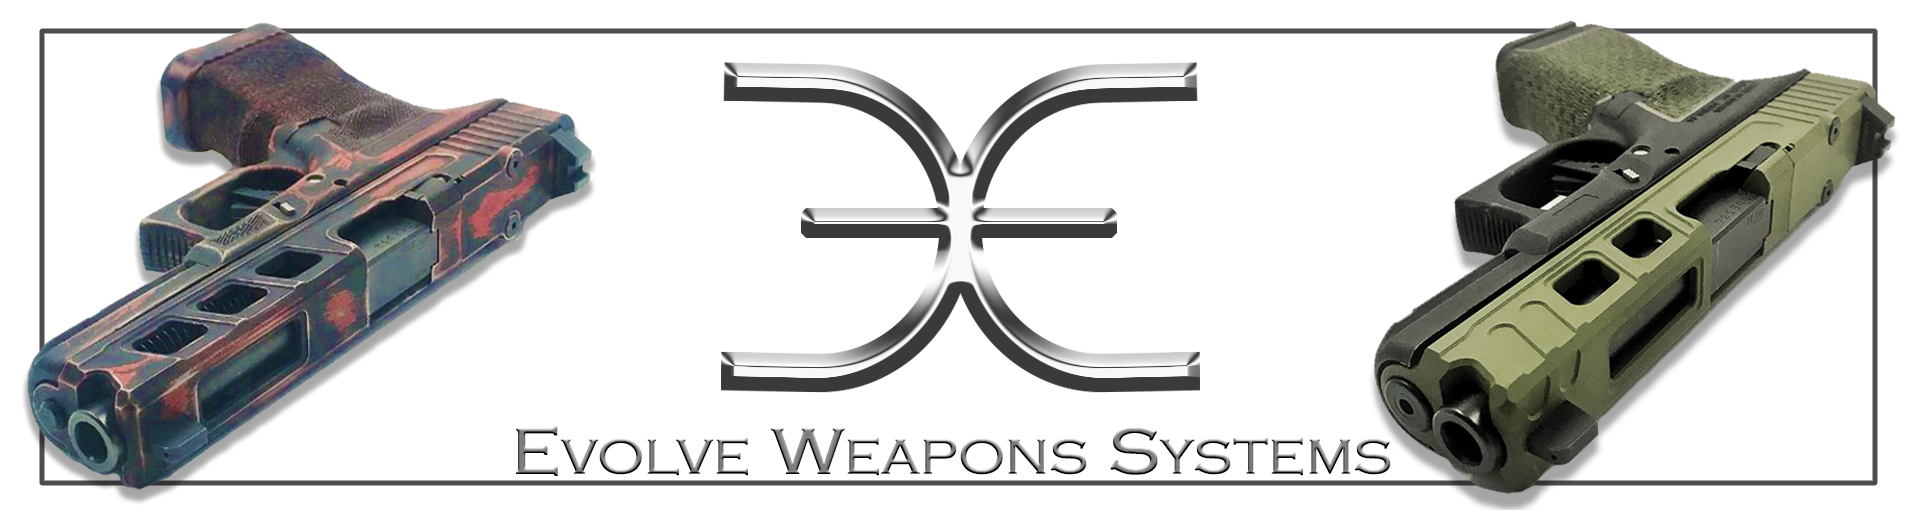 evolve-weapons-systems